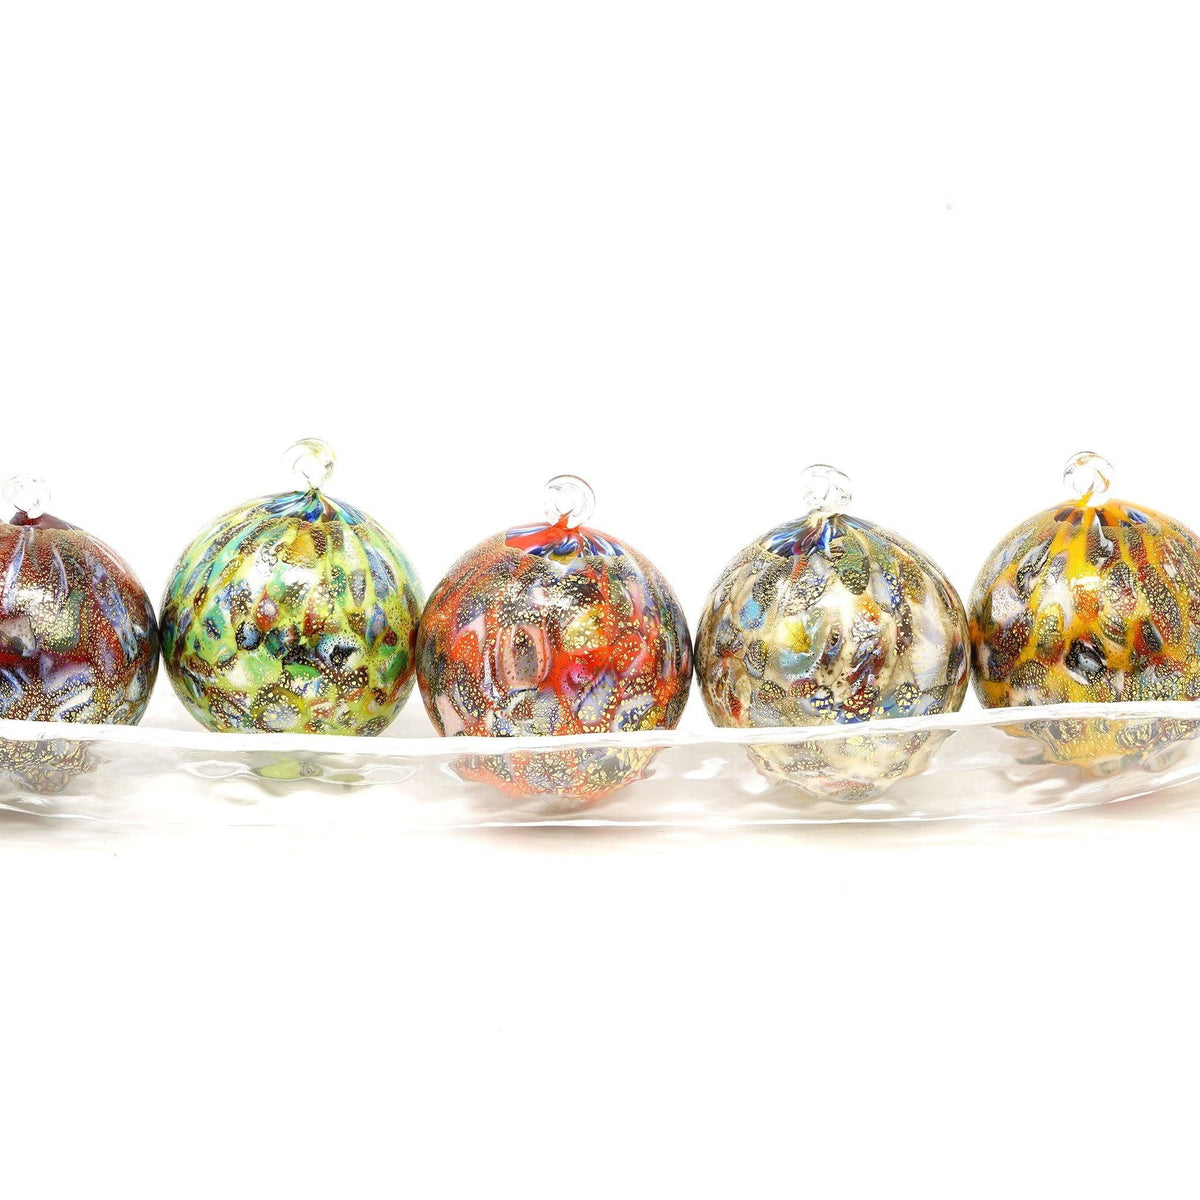 Murano Blown Glass Holiday Ornament with Spotted Macchia Accents, Made in Murano, Italy - MyItalianDecor